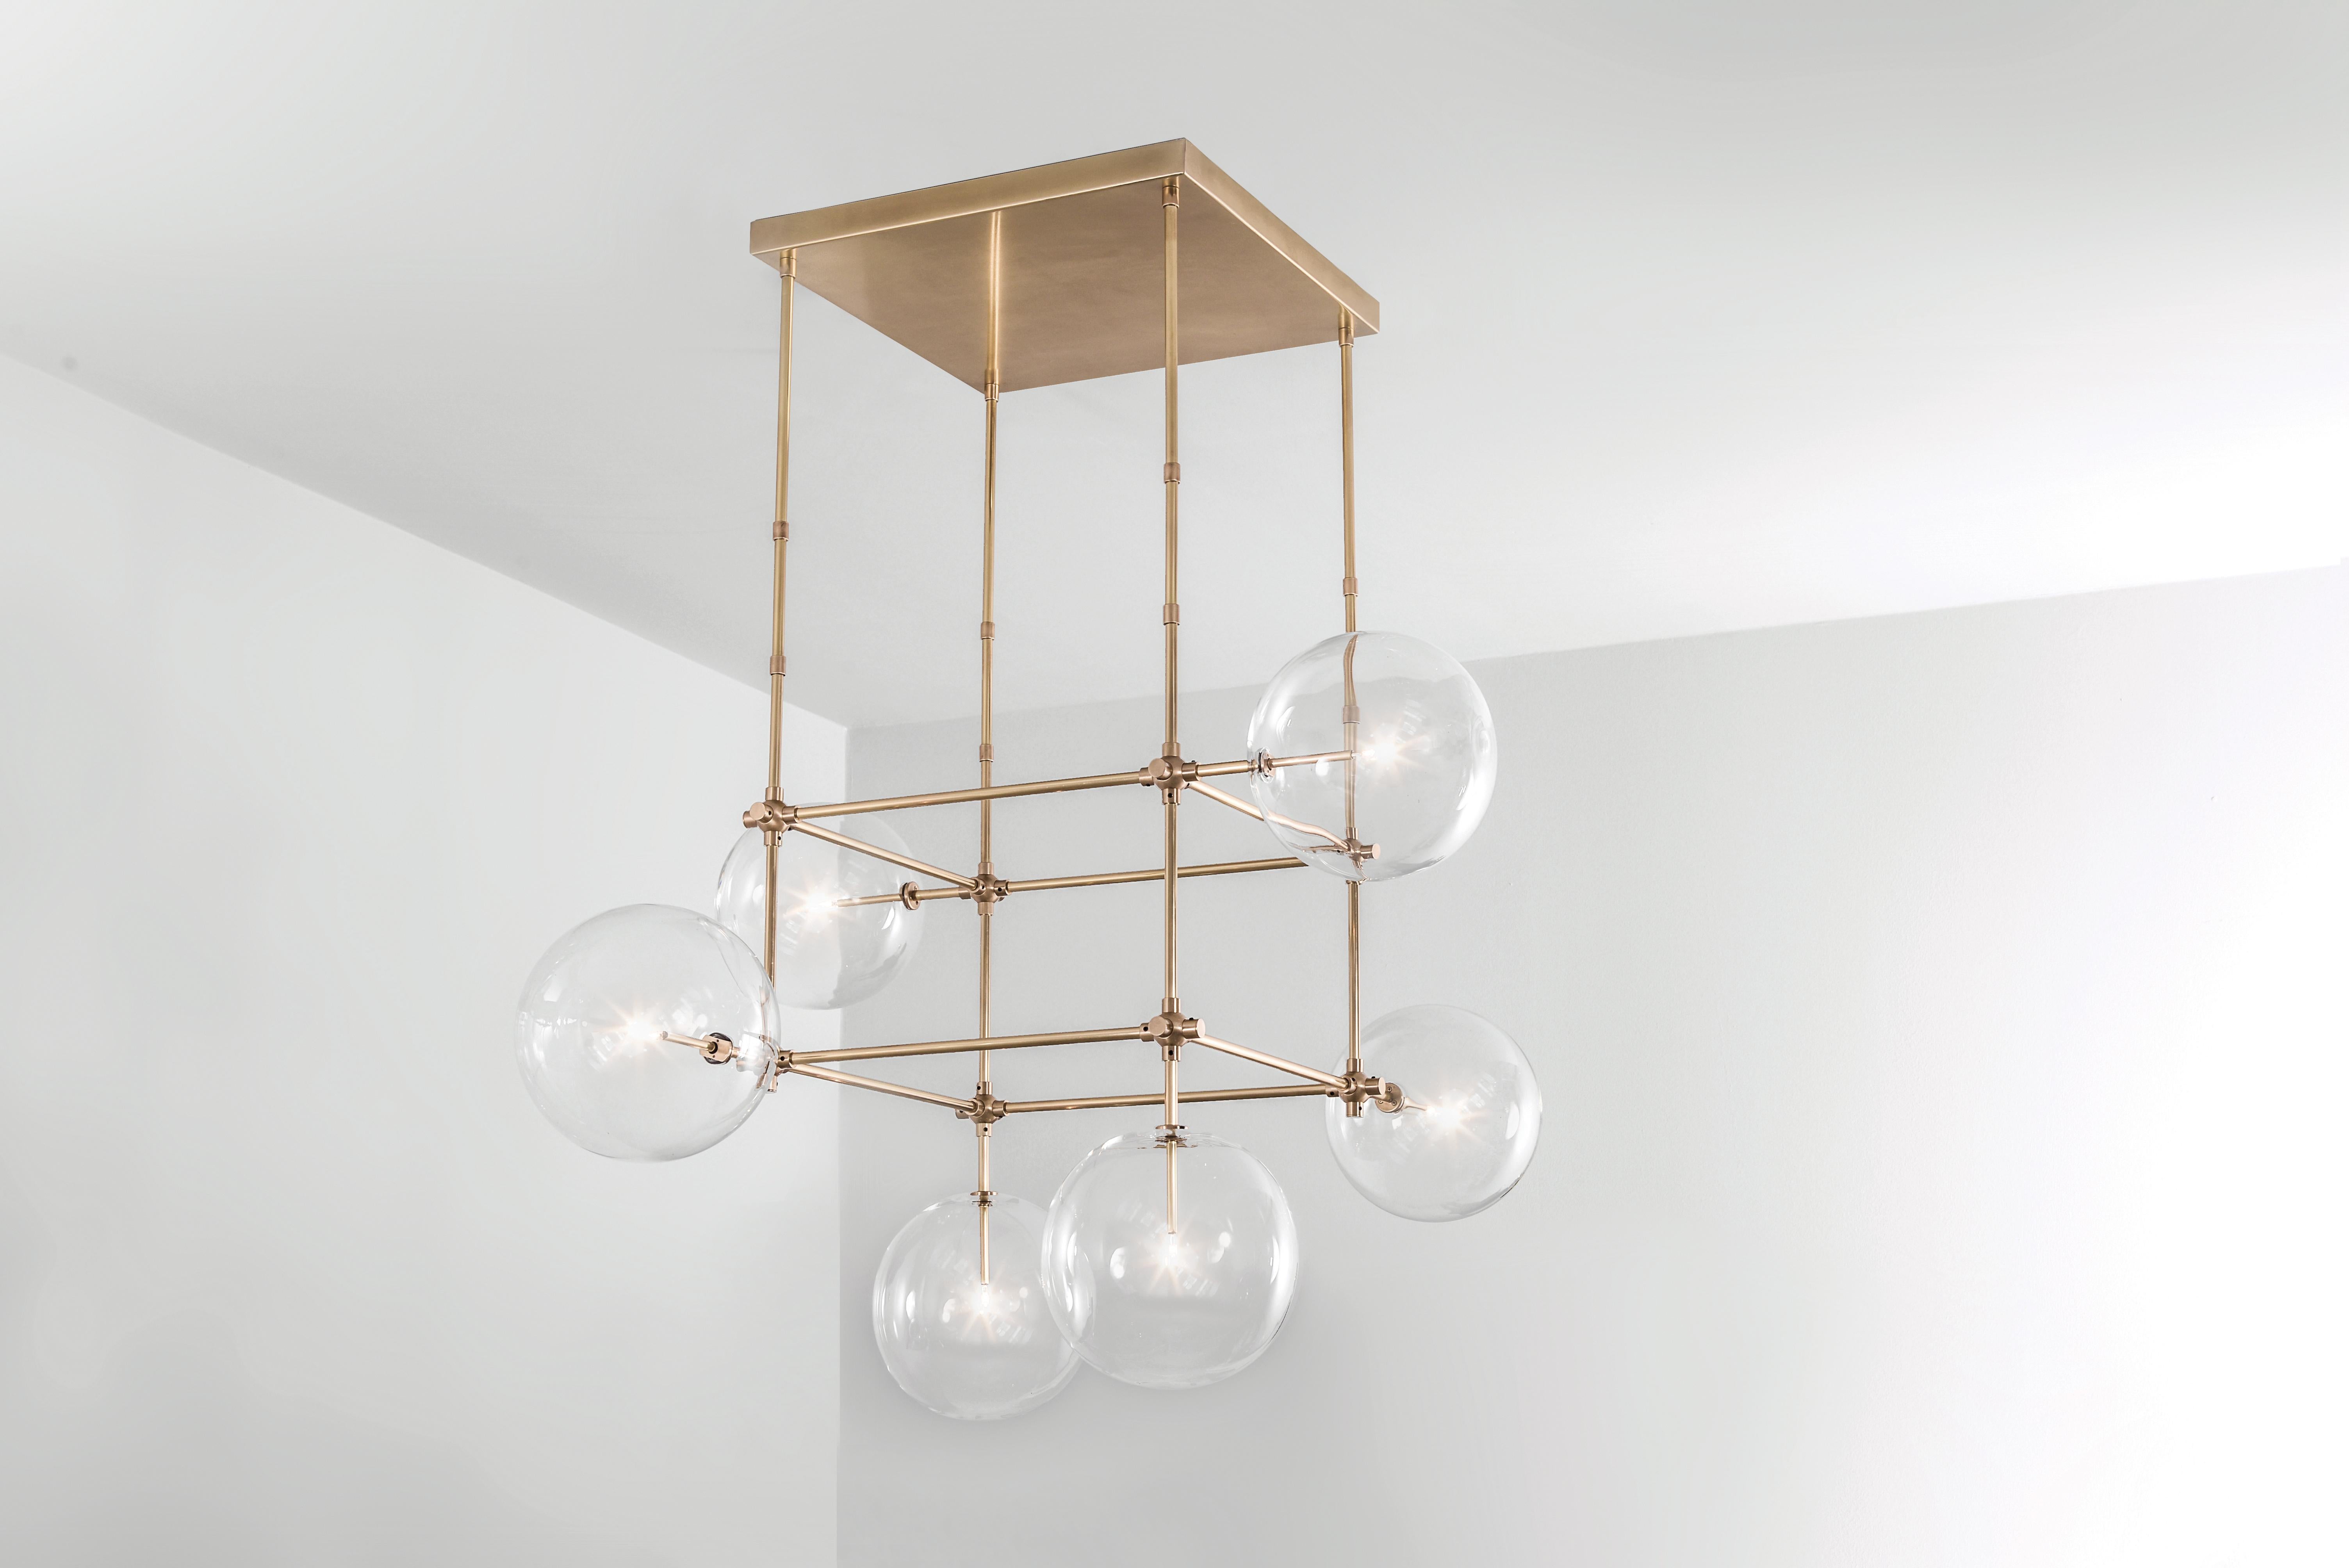 Brass 6 arm sculptural chandelier by Schwung
Dimensions: D 117.4 x W 117.4 x H 173.1 cm
Materials: Solid brass, hand-blown glass globes
Finish: natural brass.
Also available in finishes: black gunmetal or polished nickel.
All our lamps can be